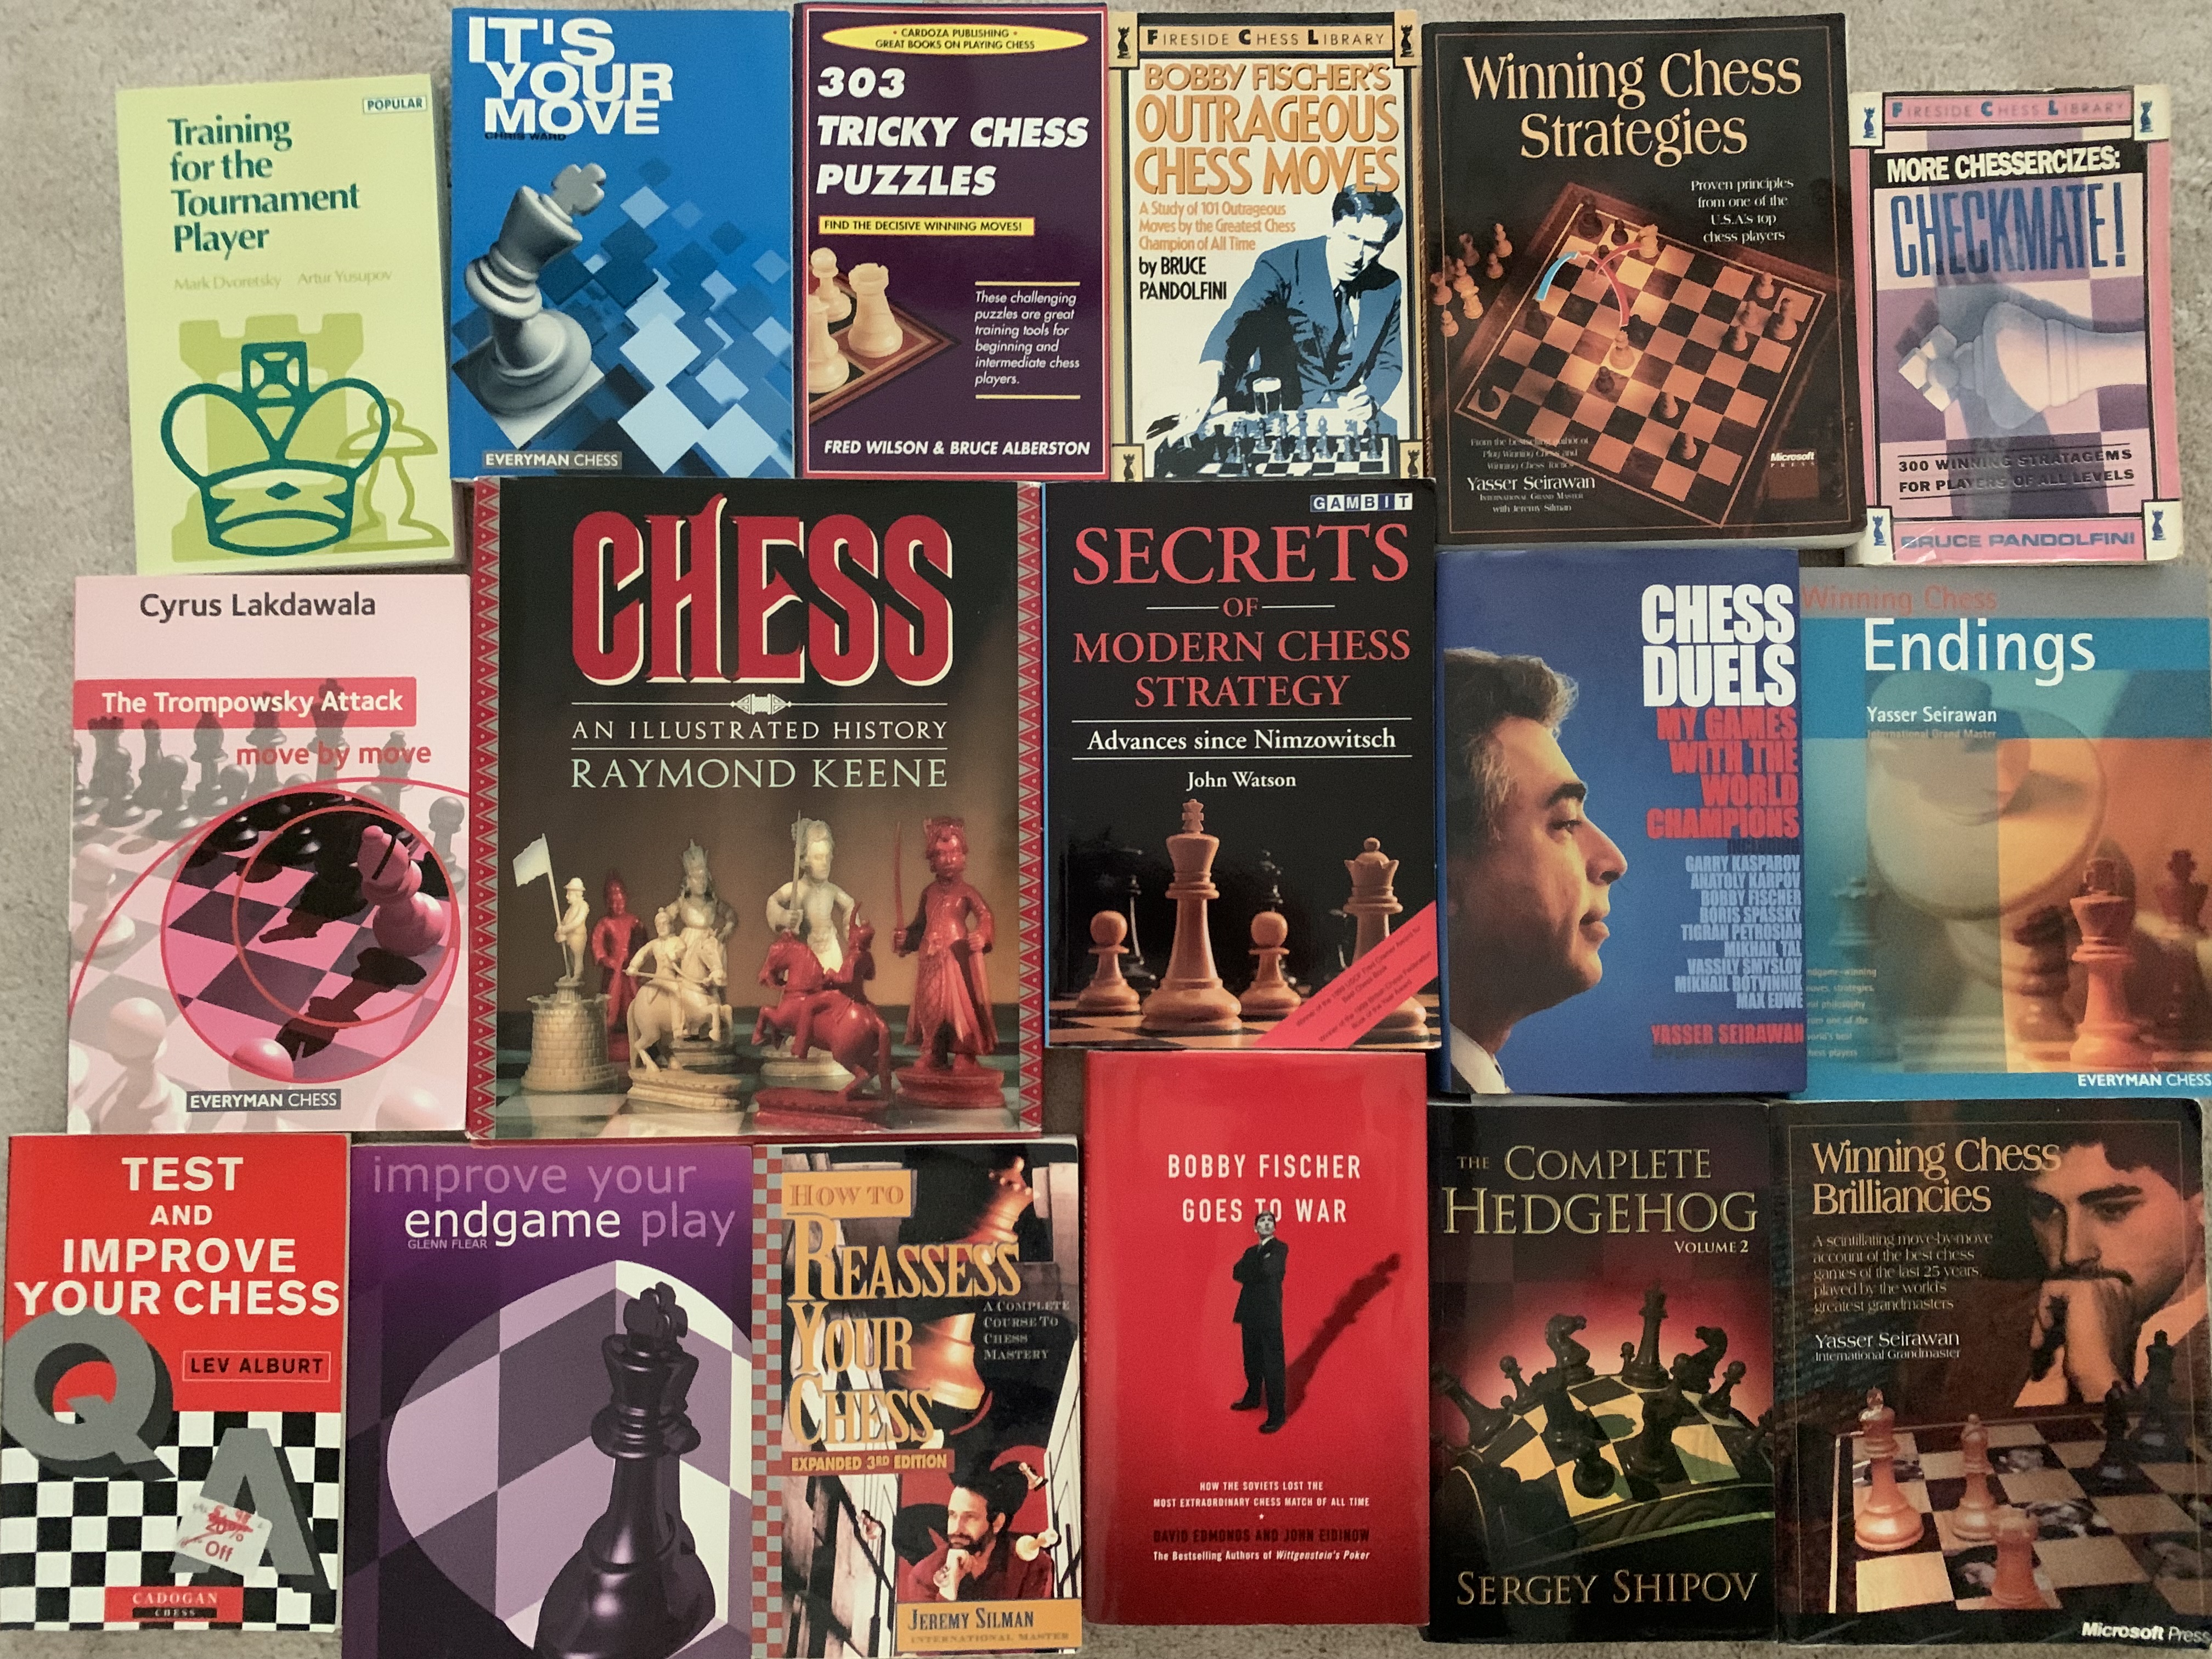 Someone donated their chess books at a thrift store near me. Any